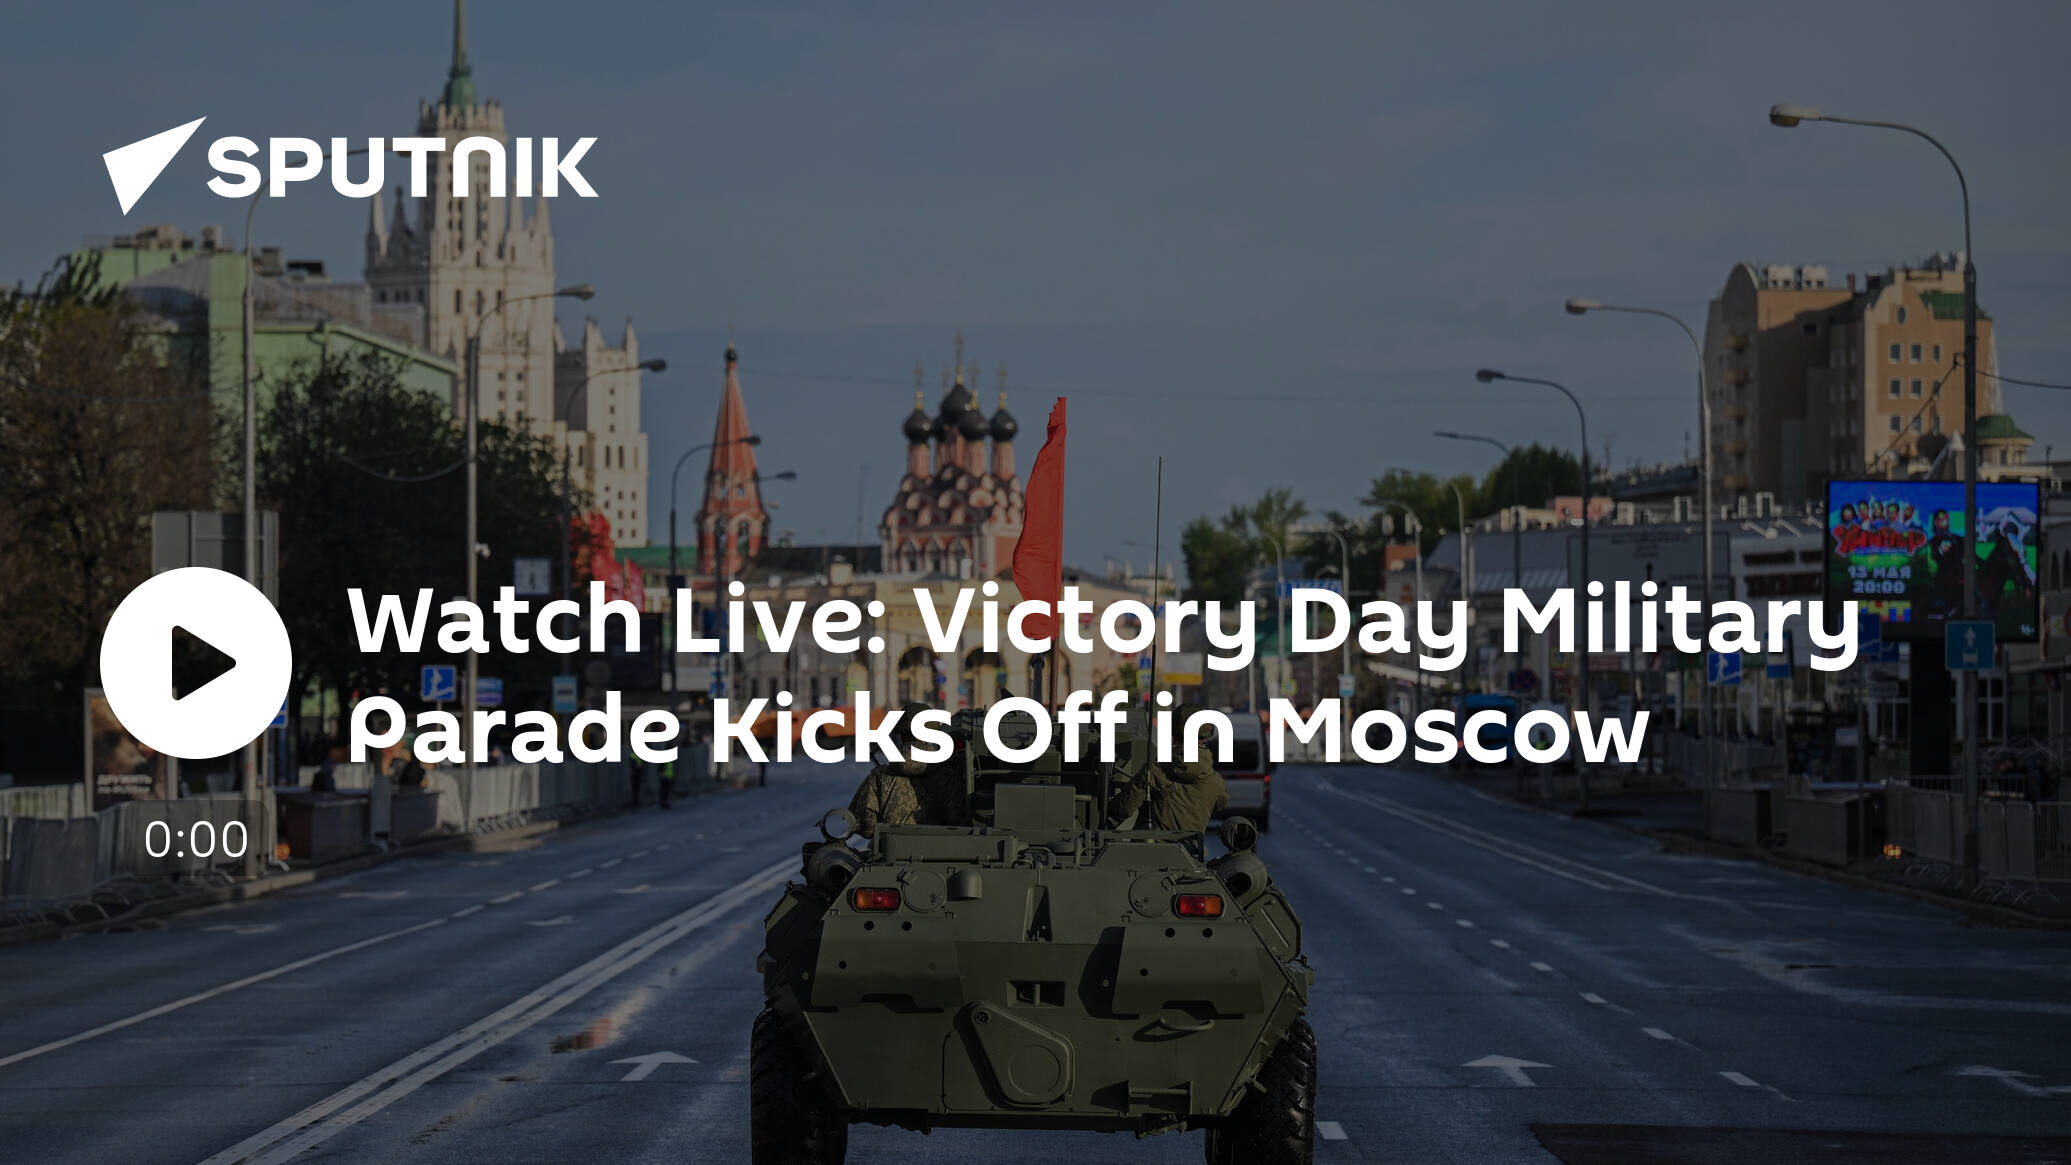 Watch Live: Victory Day Military Parade Kicks Off in Moscow [Video]